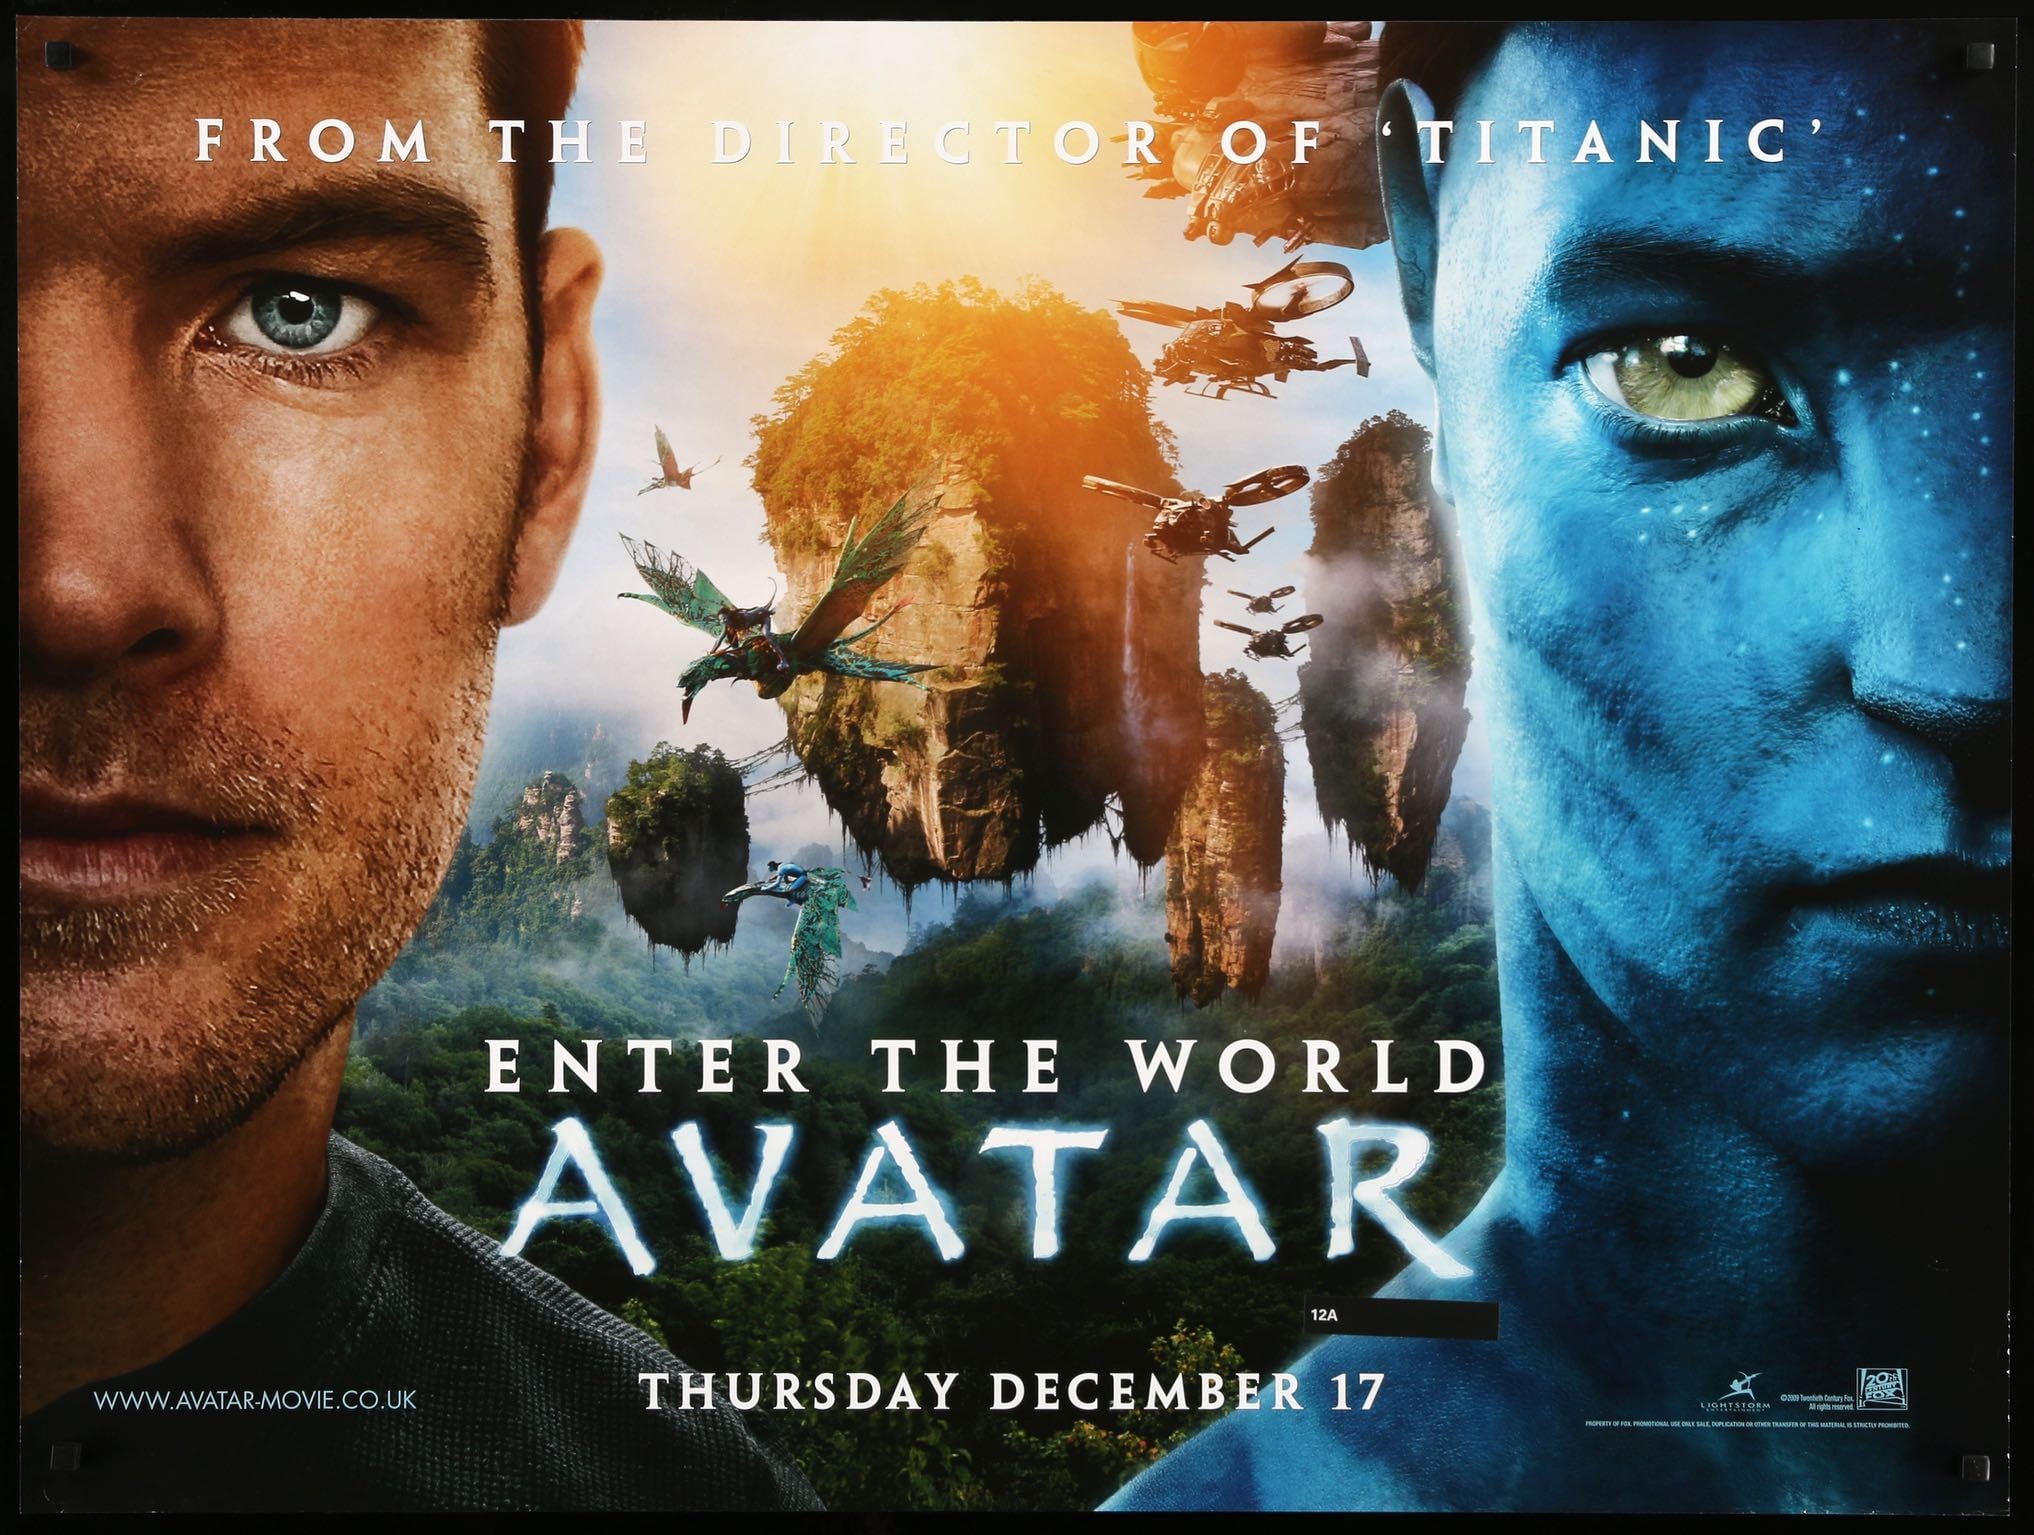 Avatar Movie Posters for Sale  Redbubble